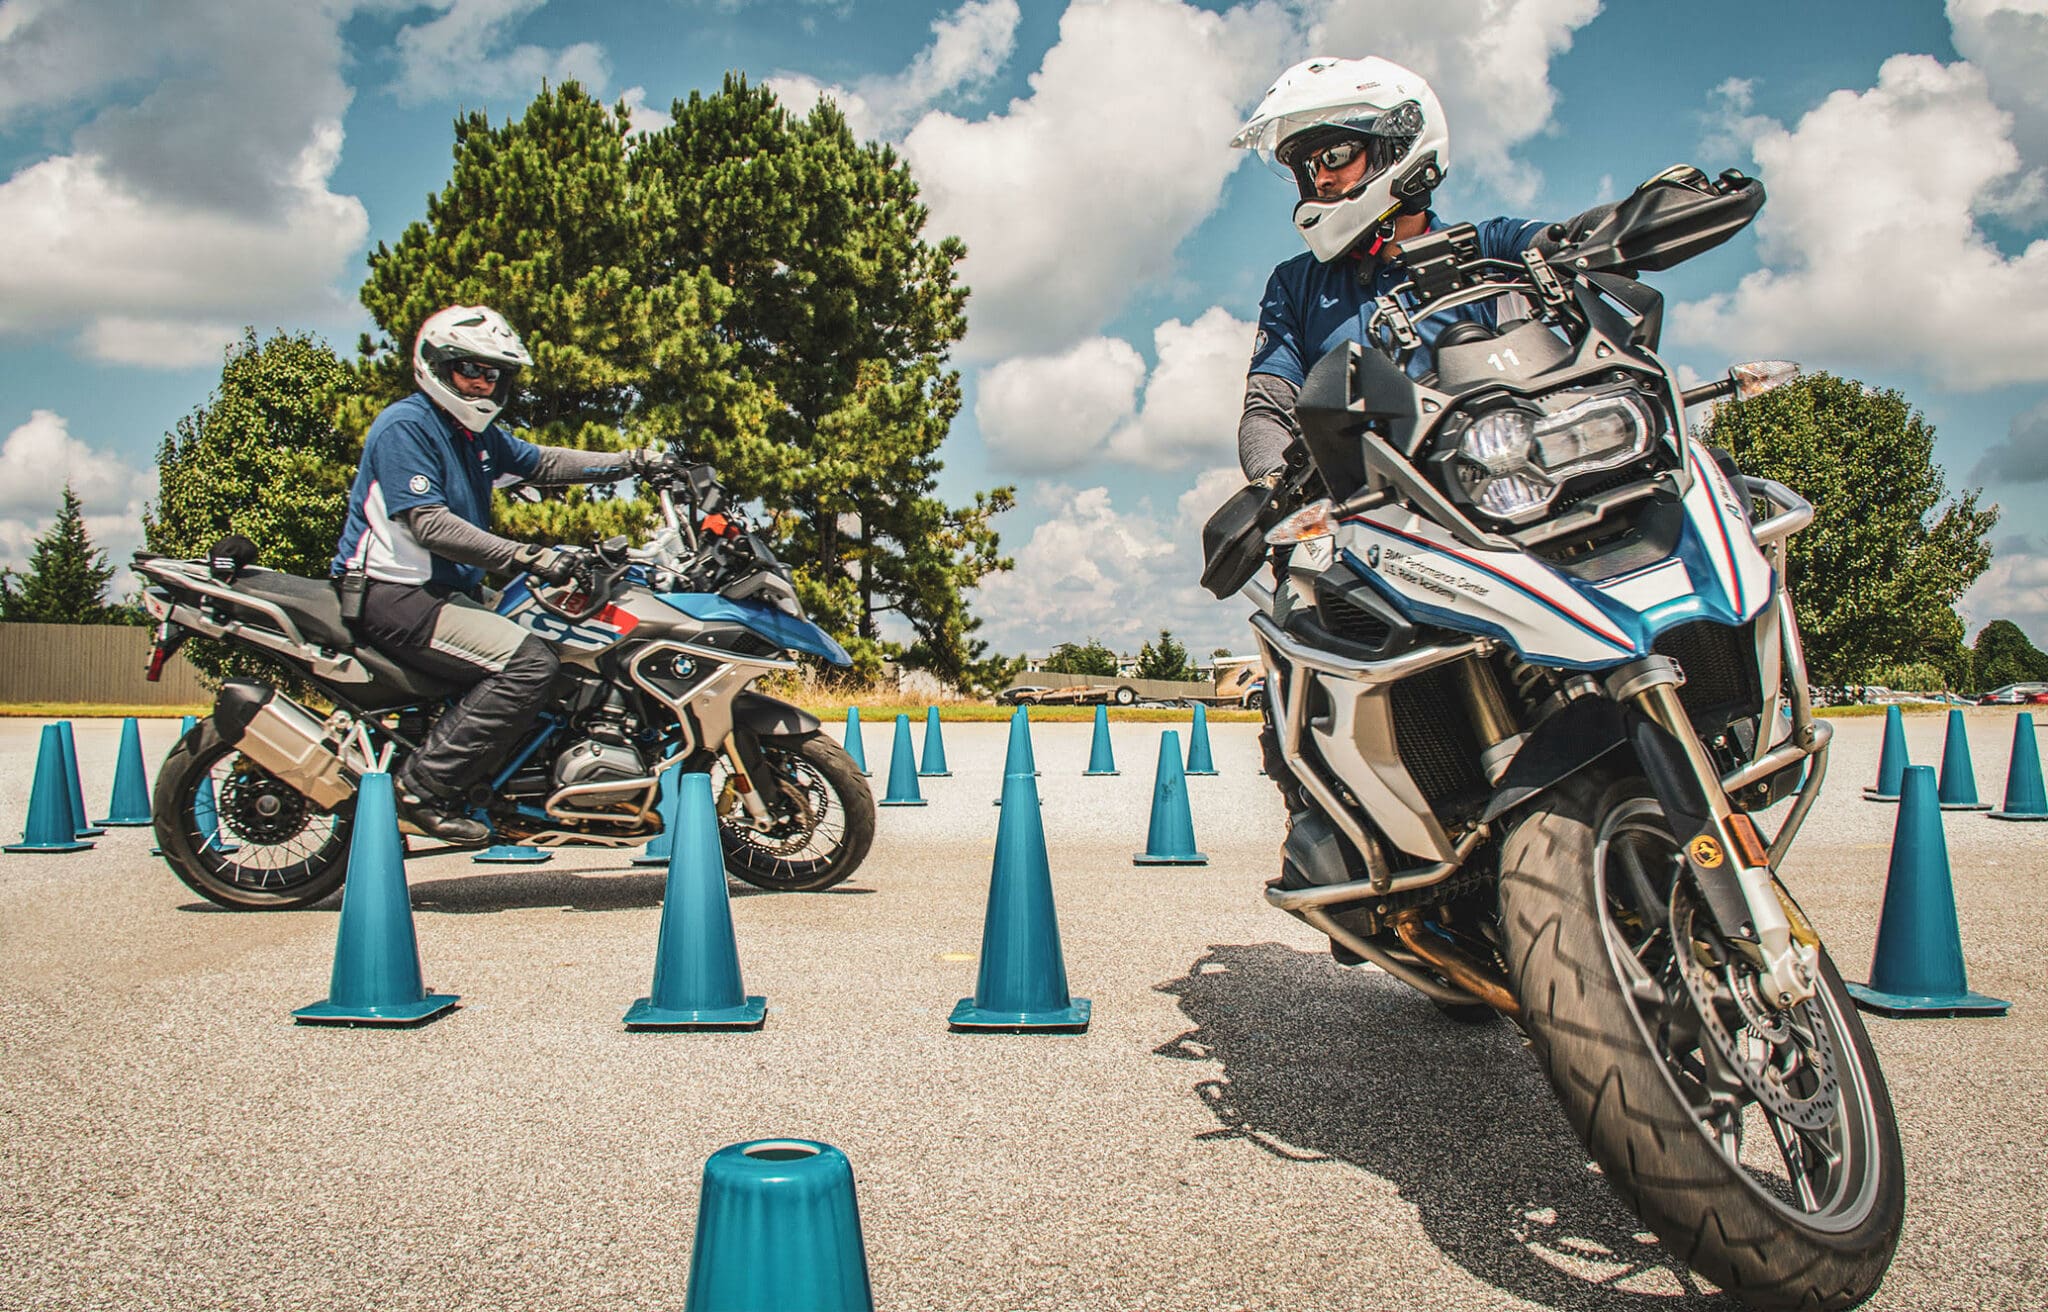 BMW Performance Center Has Riding Courses For Every Motorcyclist